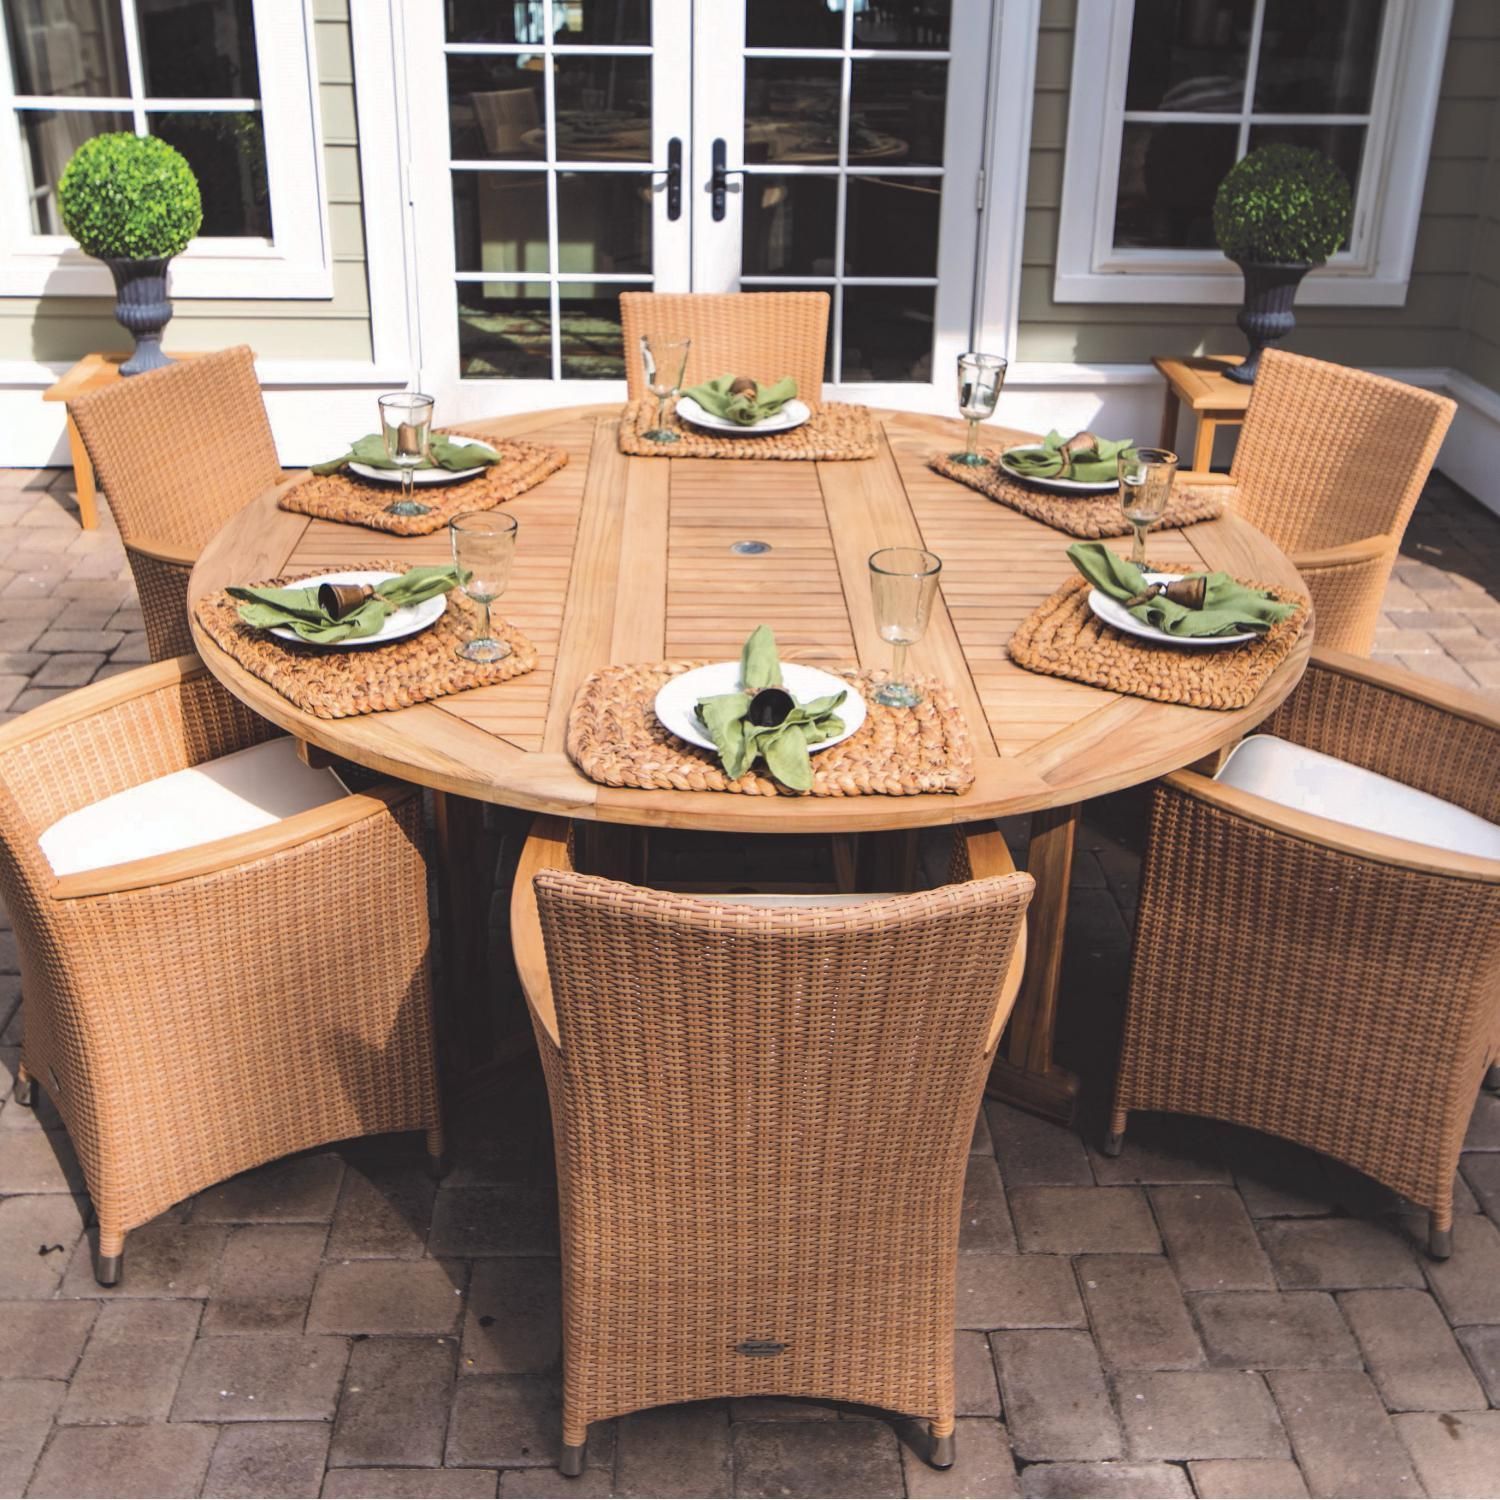 Helena 7 Piece Wicker Patio Dining Set W/ 72 Inch Round Drop Leaf Table With Regard To Teak Armchair Round Patio Dining Sets (View 14 of 15)